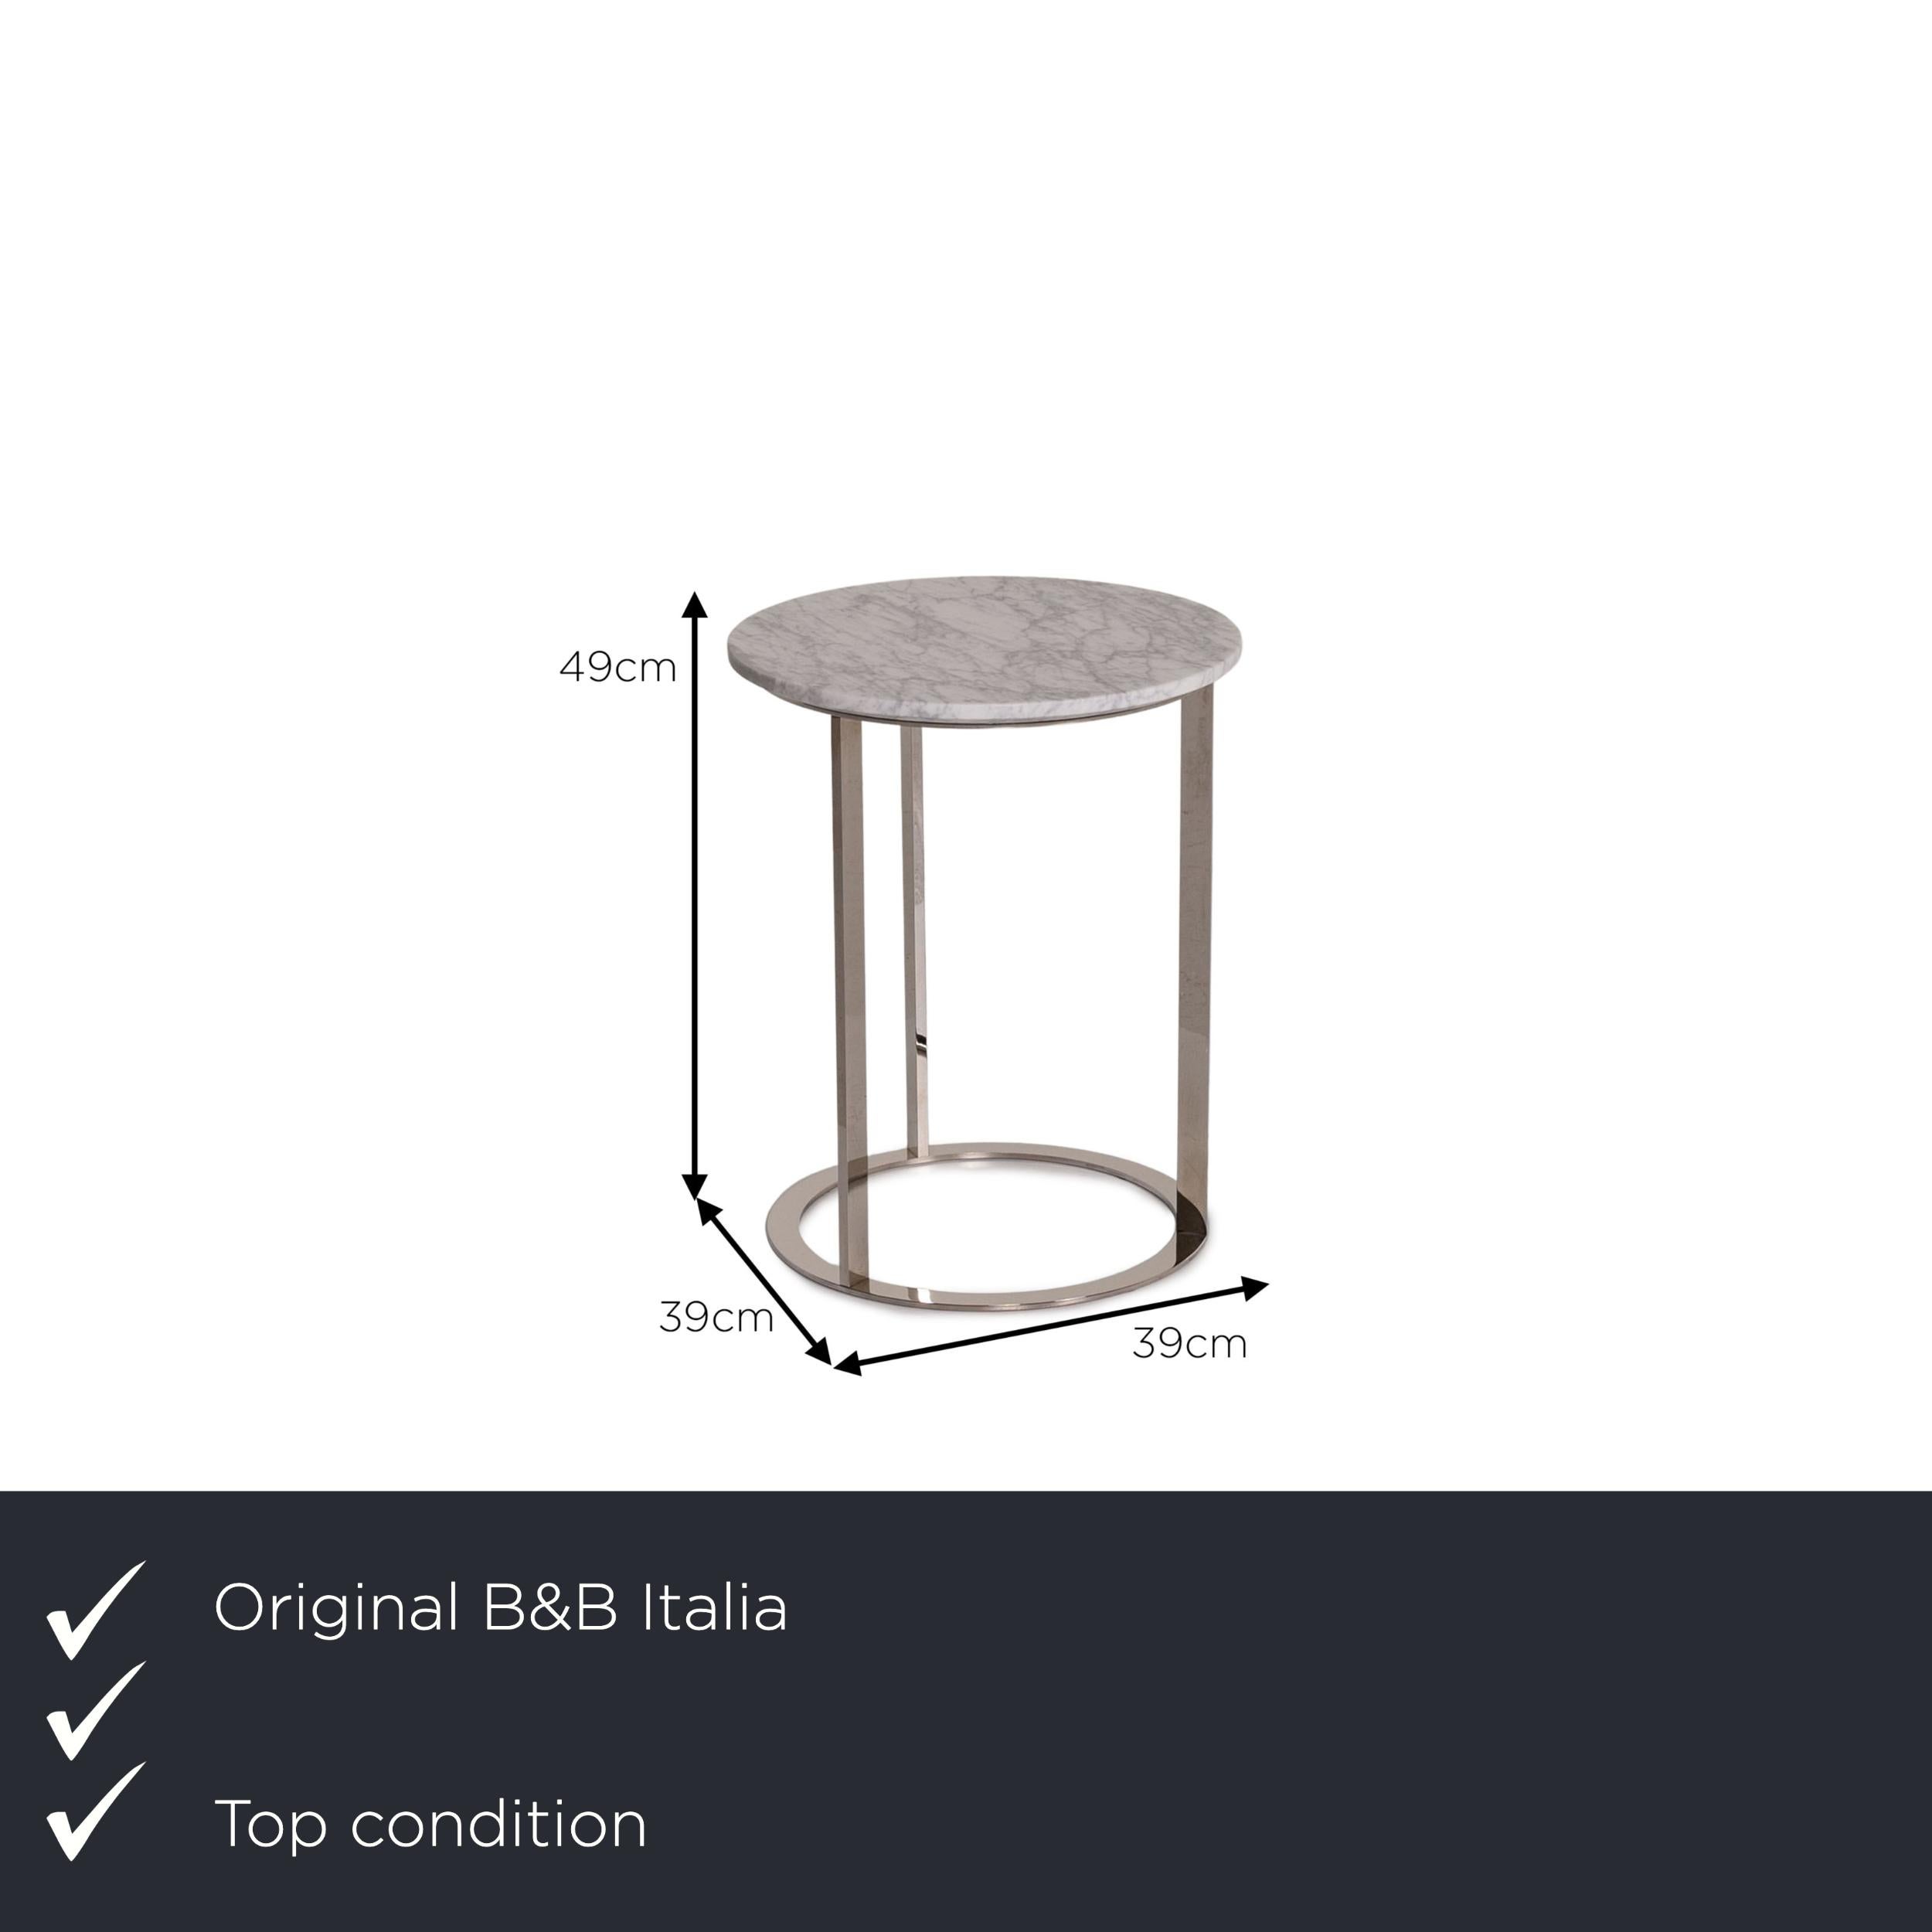 We present to you a B&B Italia Mera marble table white coffee table.

Product measurements in centimeters:

depth: 39
width: 39
height: 49
seat height: 
rest height: 
seat depth: 
seat width: 
back height:

 